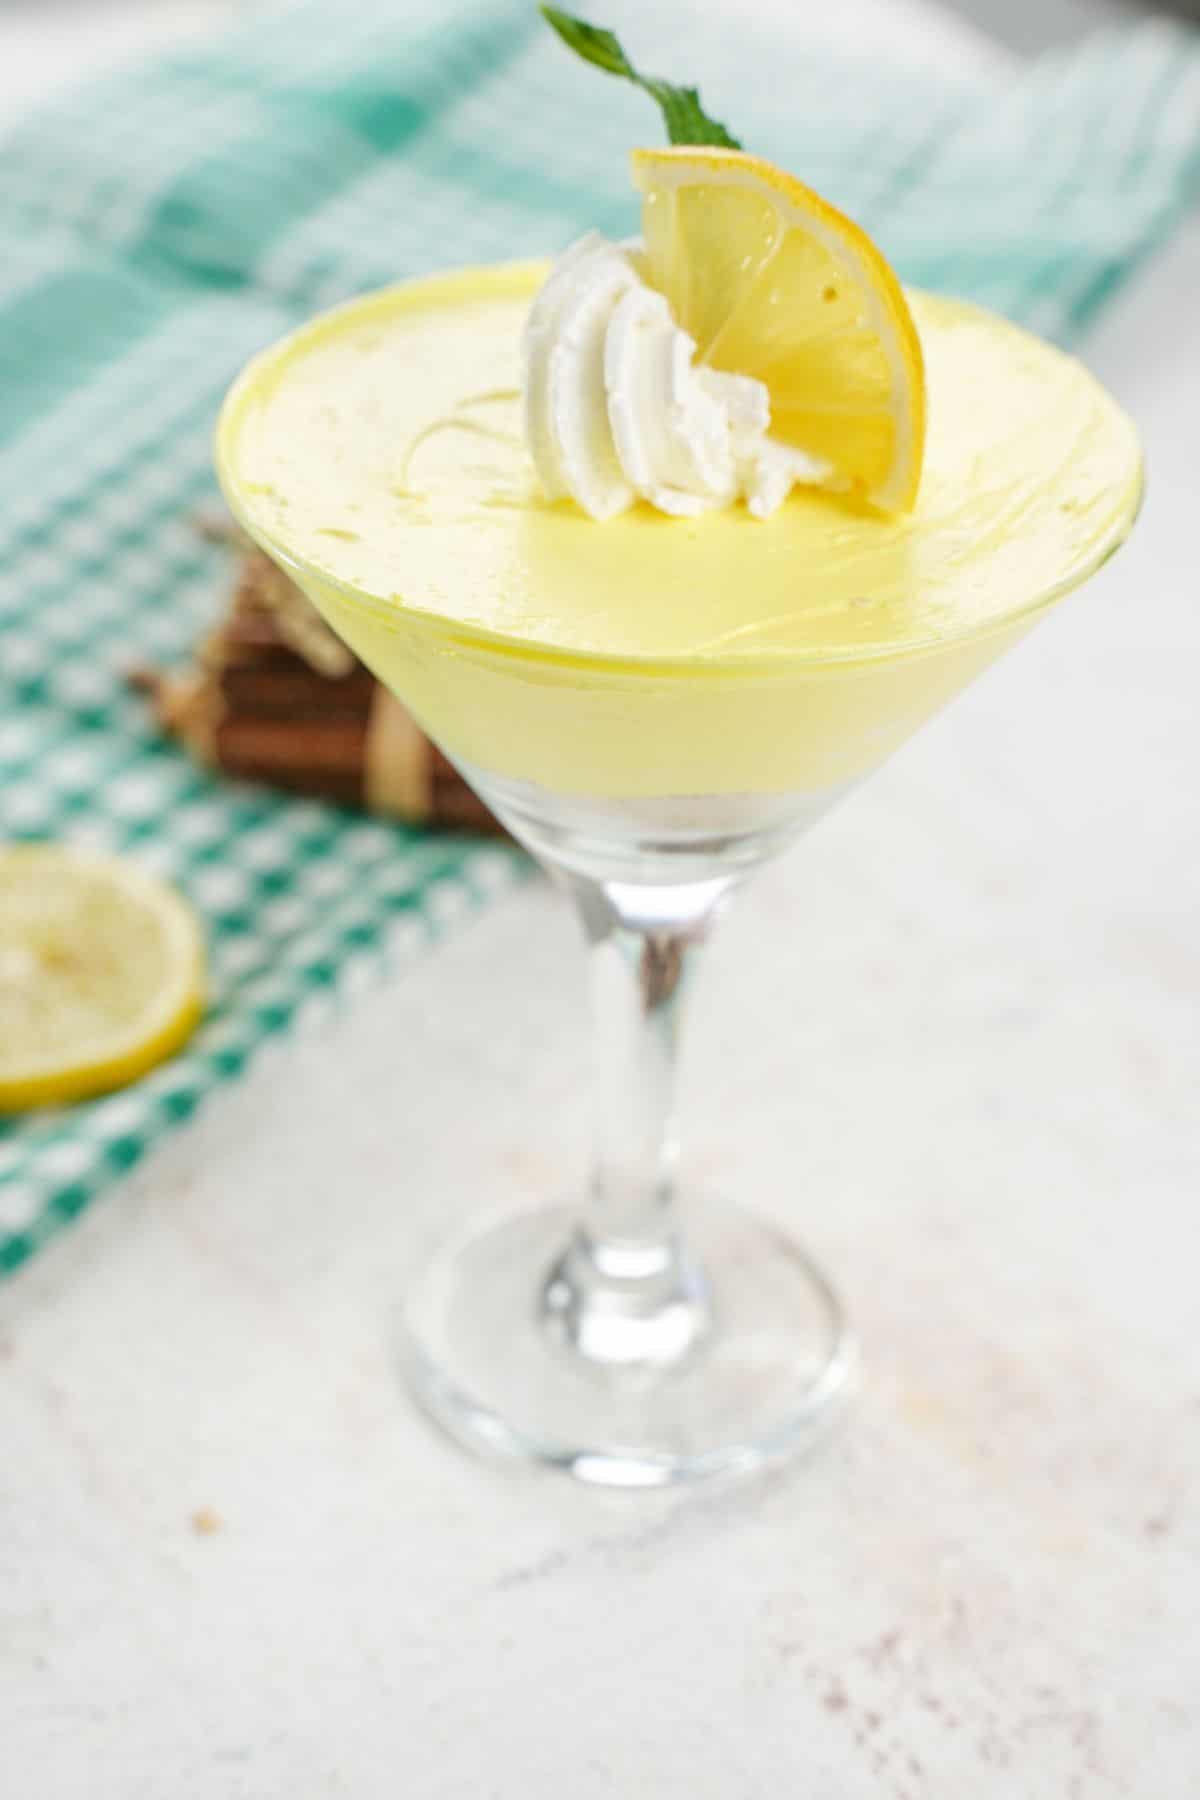 no-bake lemon cheesecake mousse styled in a martini glass with lemon and whipped cream topping